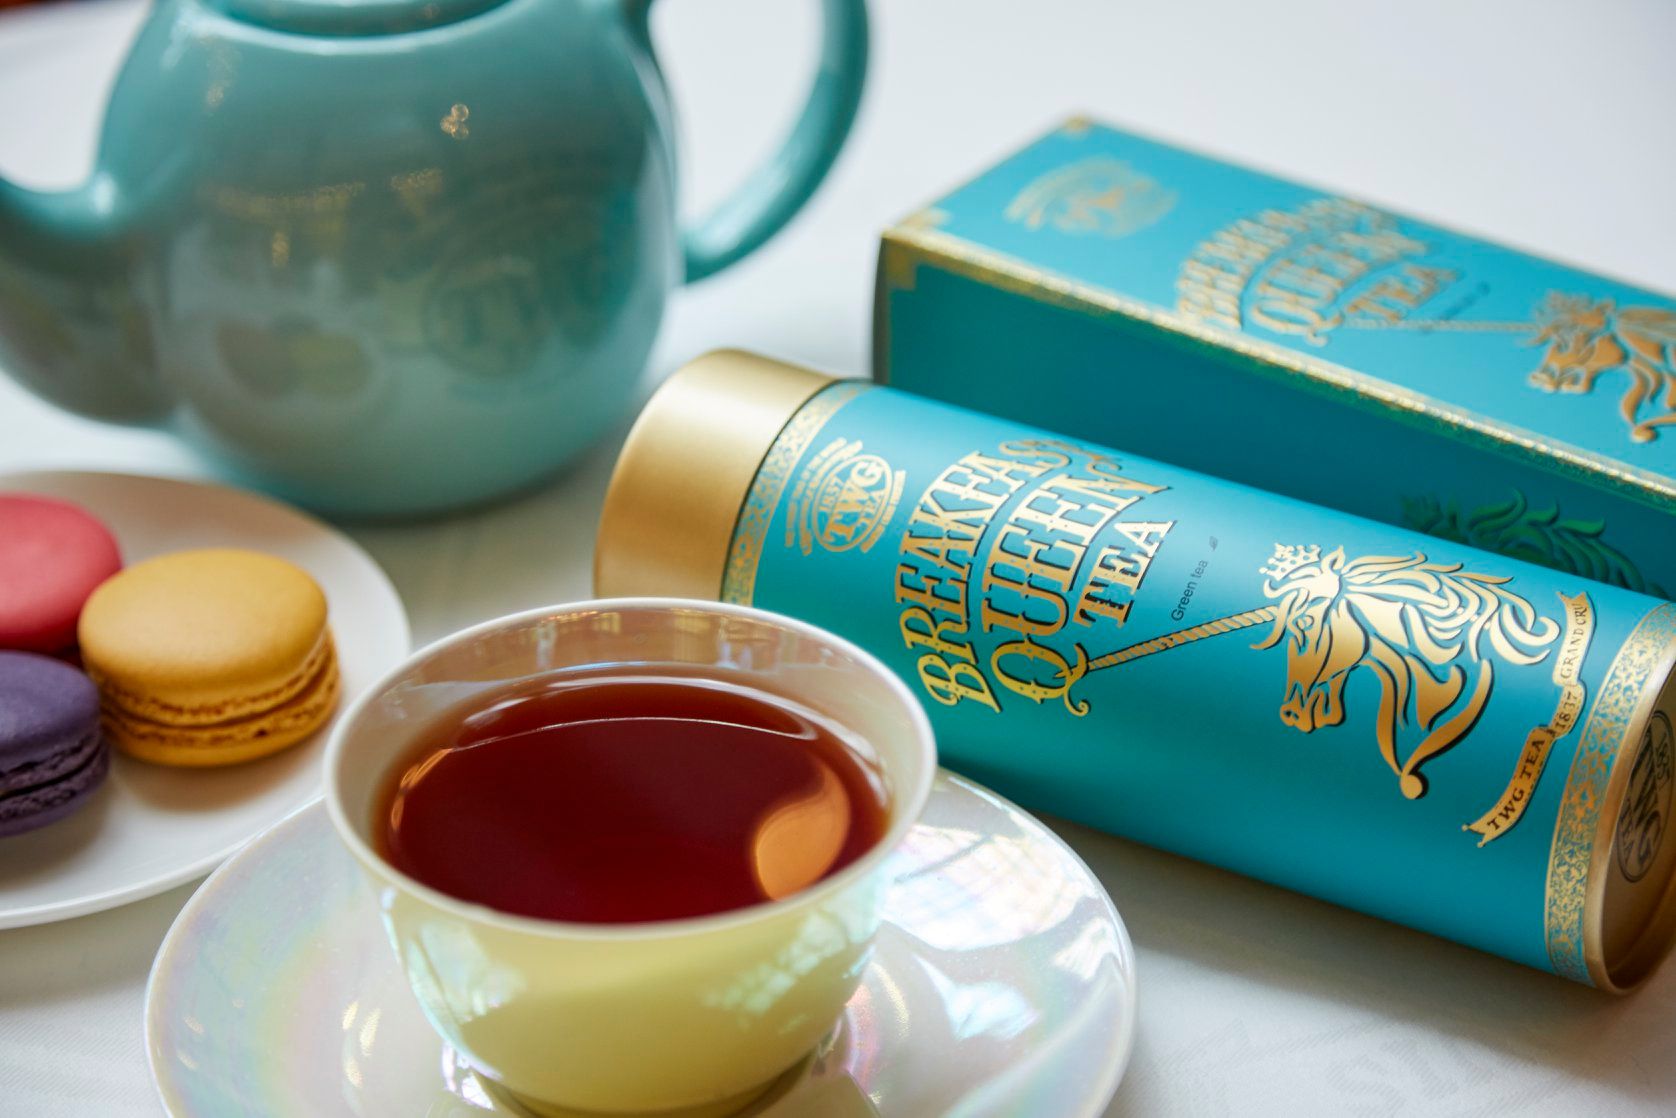 The most precious gift for all mothers is the gift of your love and time. Put a smile on her face with Breakfast Queen Tea, a vivacious blend of precious whole leaf green teas brilliantly balanced by notes of sweet lemon and a hint of fragrant rose. An ideal cup of tea to soften awakenings and welcome in the dawn. Shop now at TWGTea.Com.